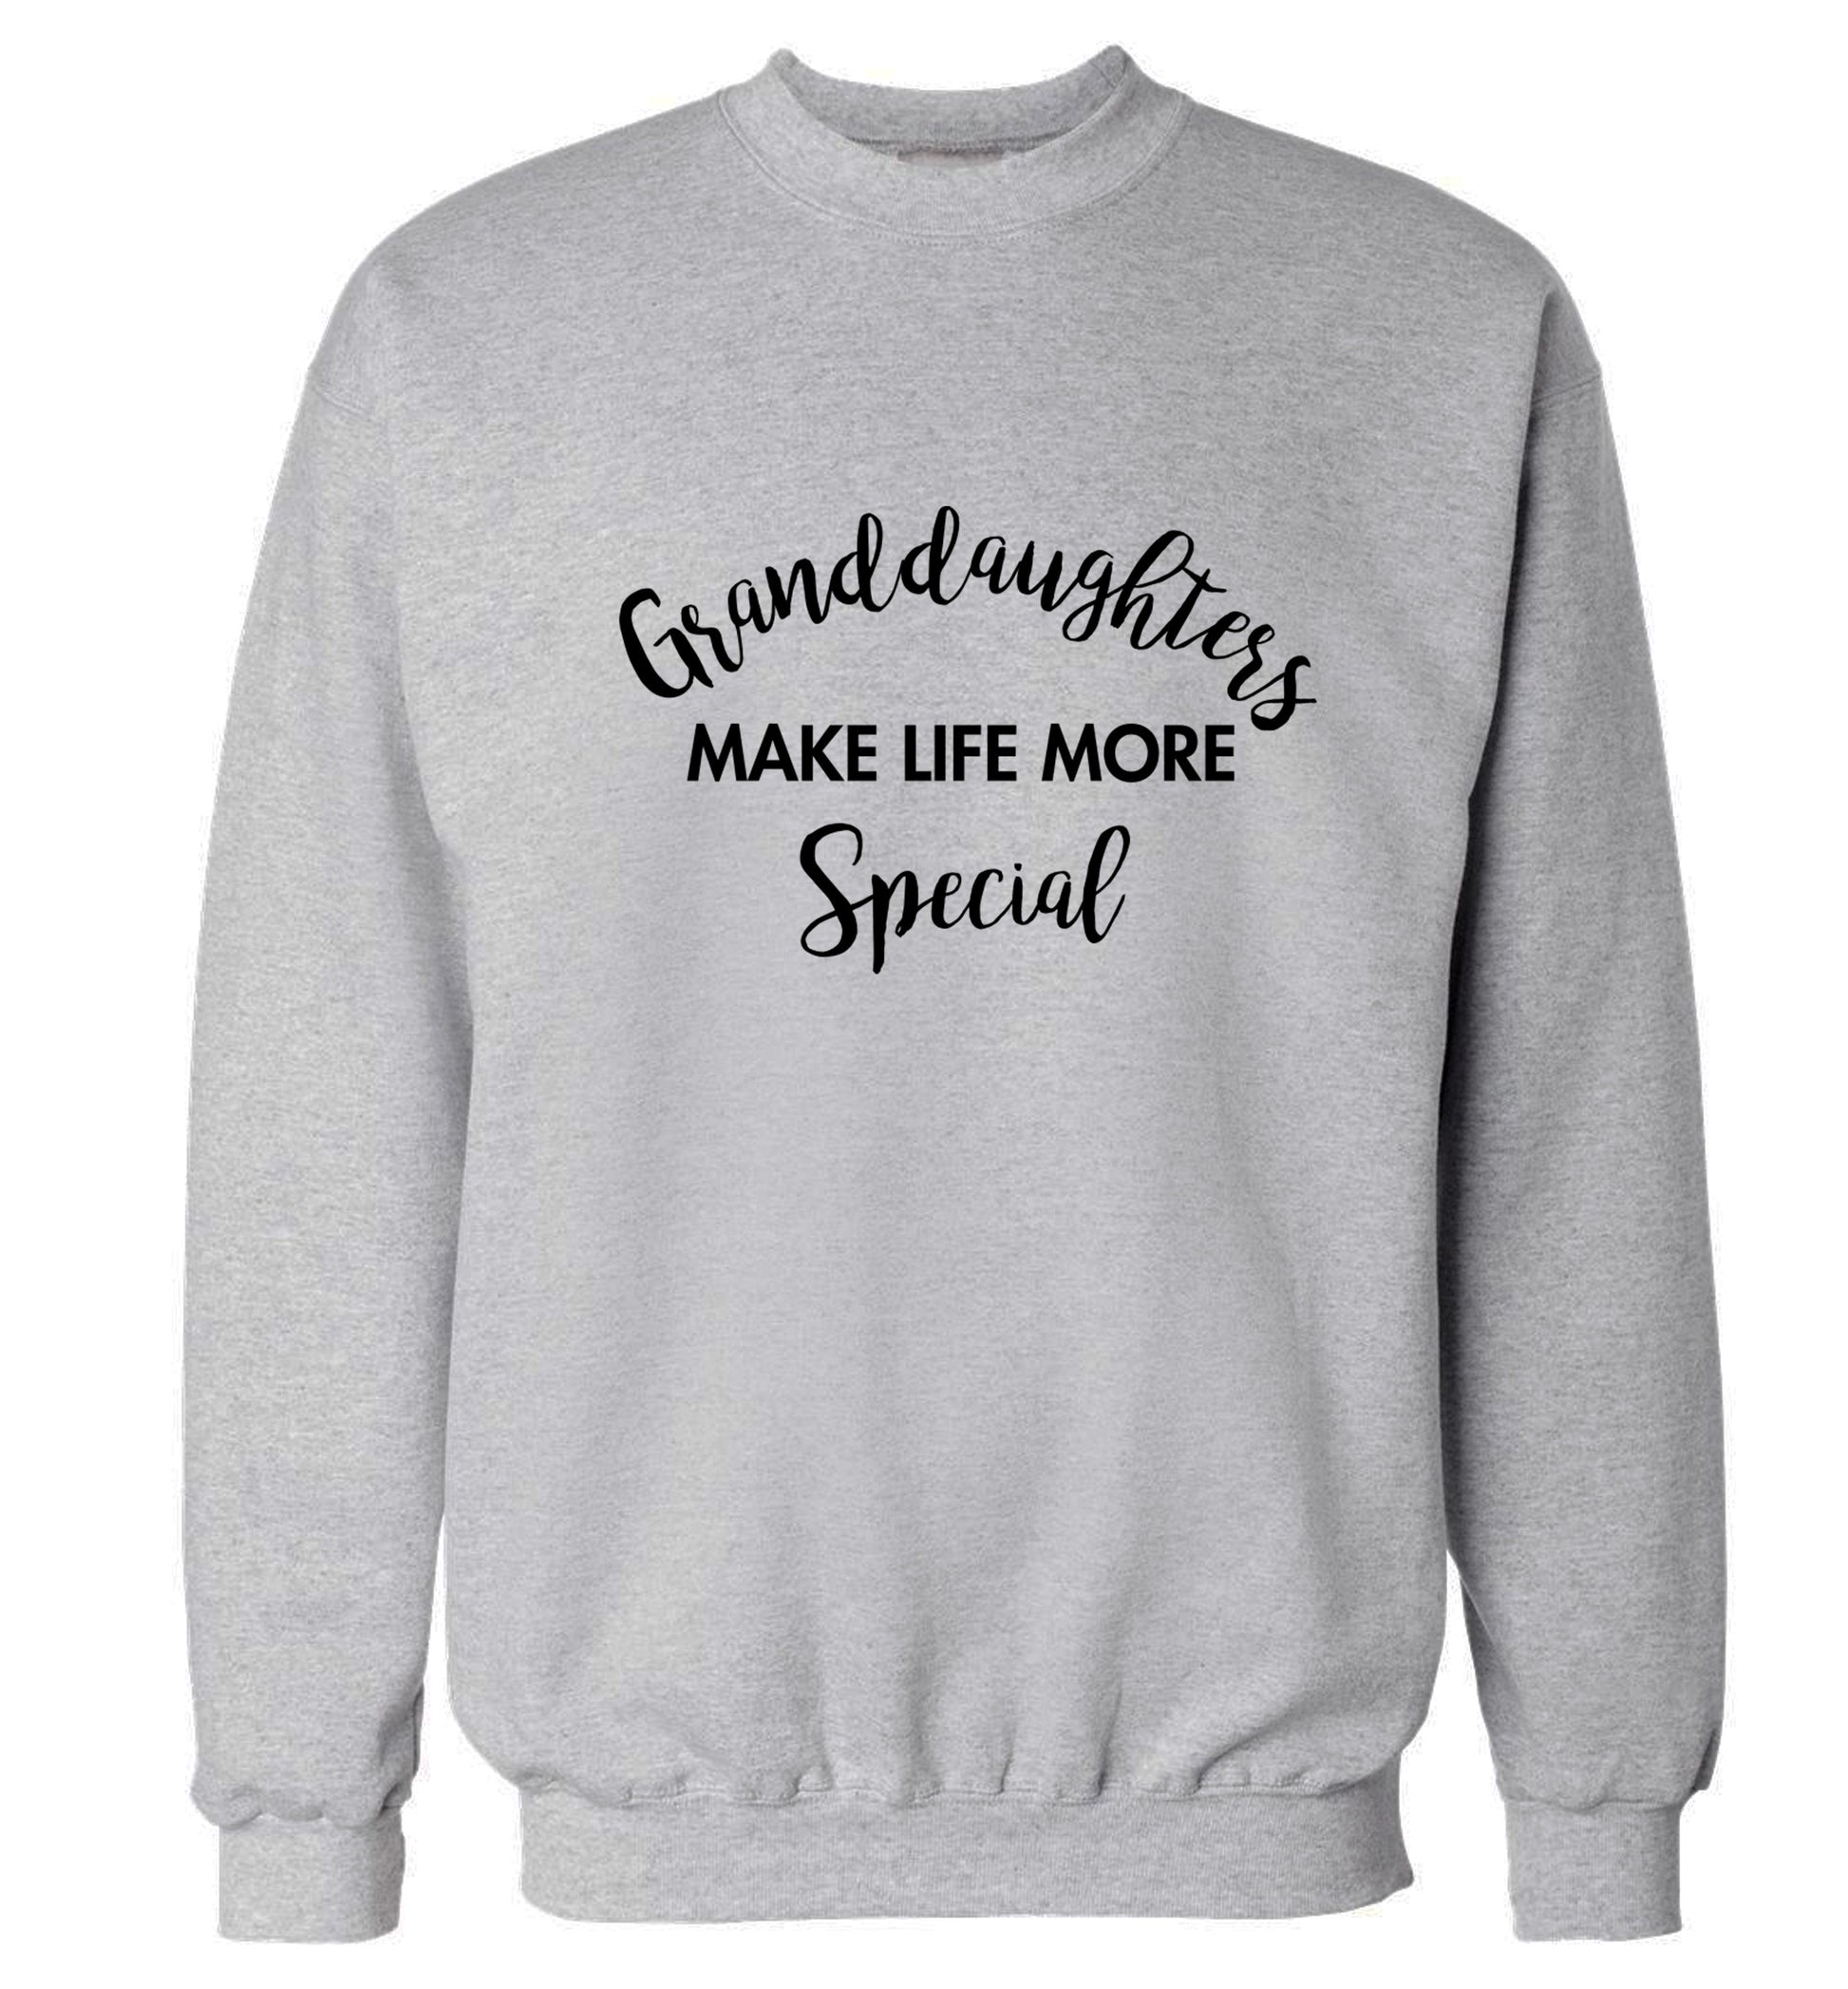 Granddaughters make life more special Adult's unisex grey Sweater 2XL